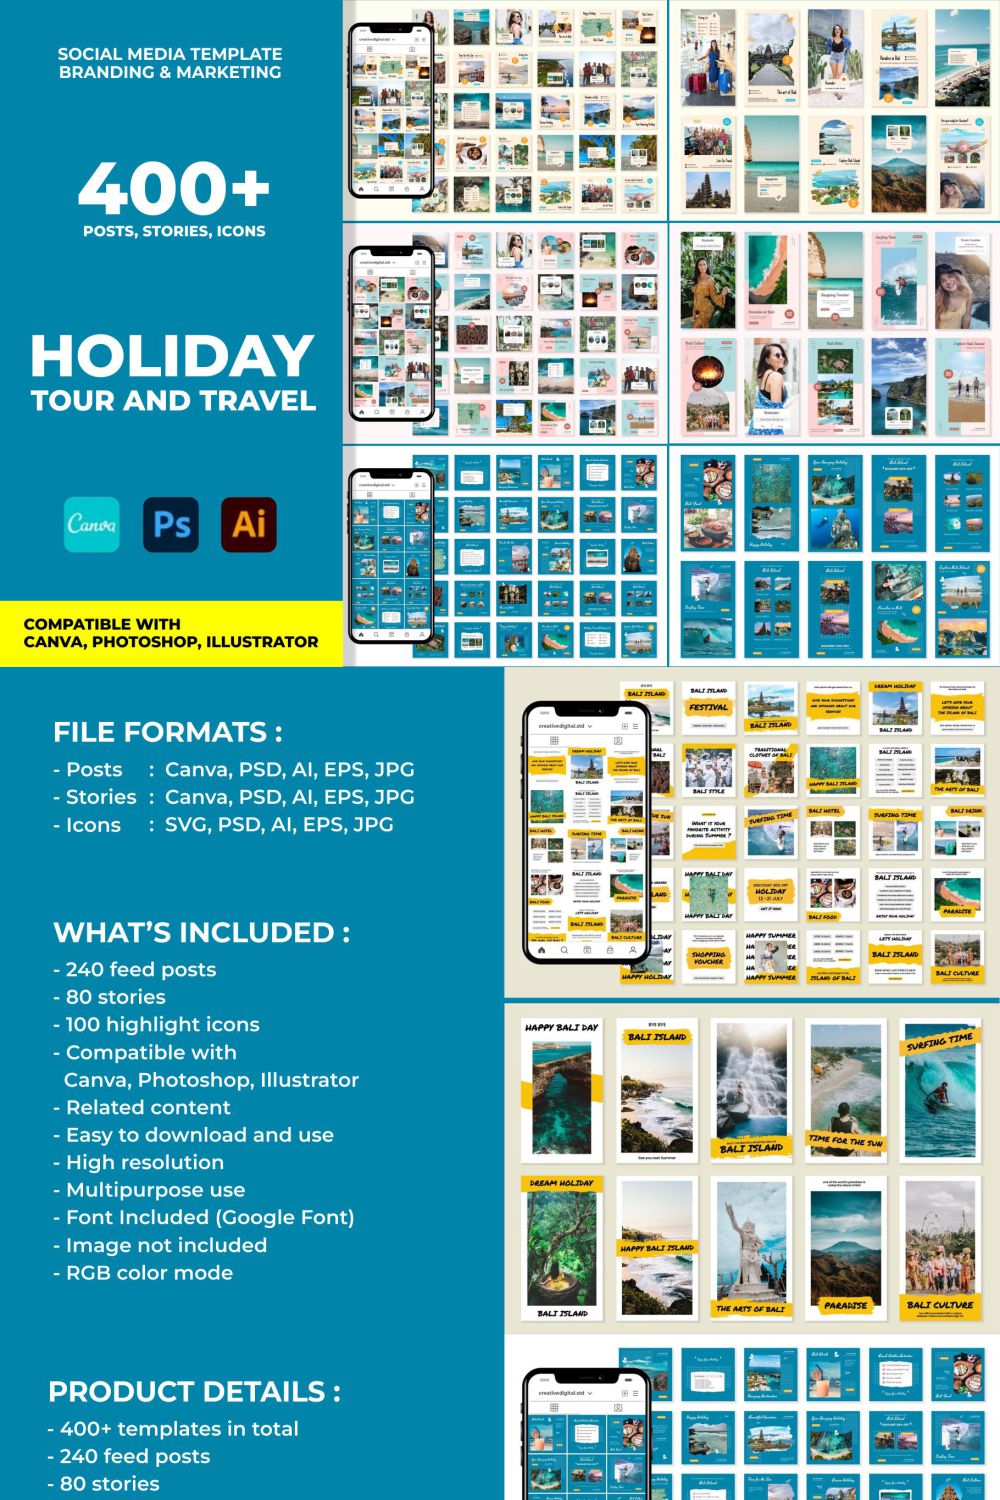 400 Plus Instagram Template Bundle For Holiday Tour And Travel Pinterest Image.